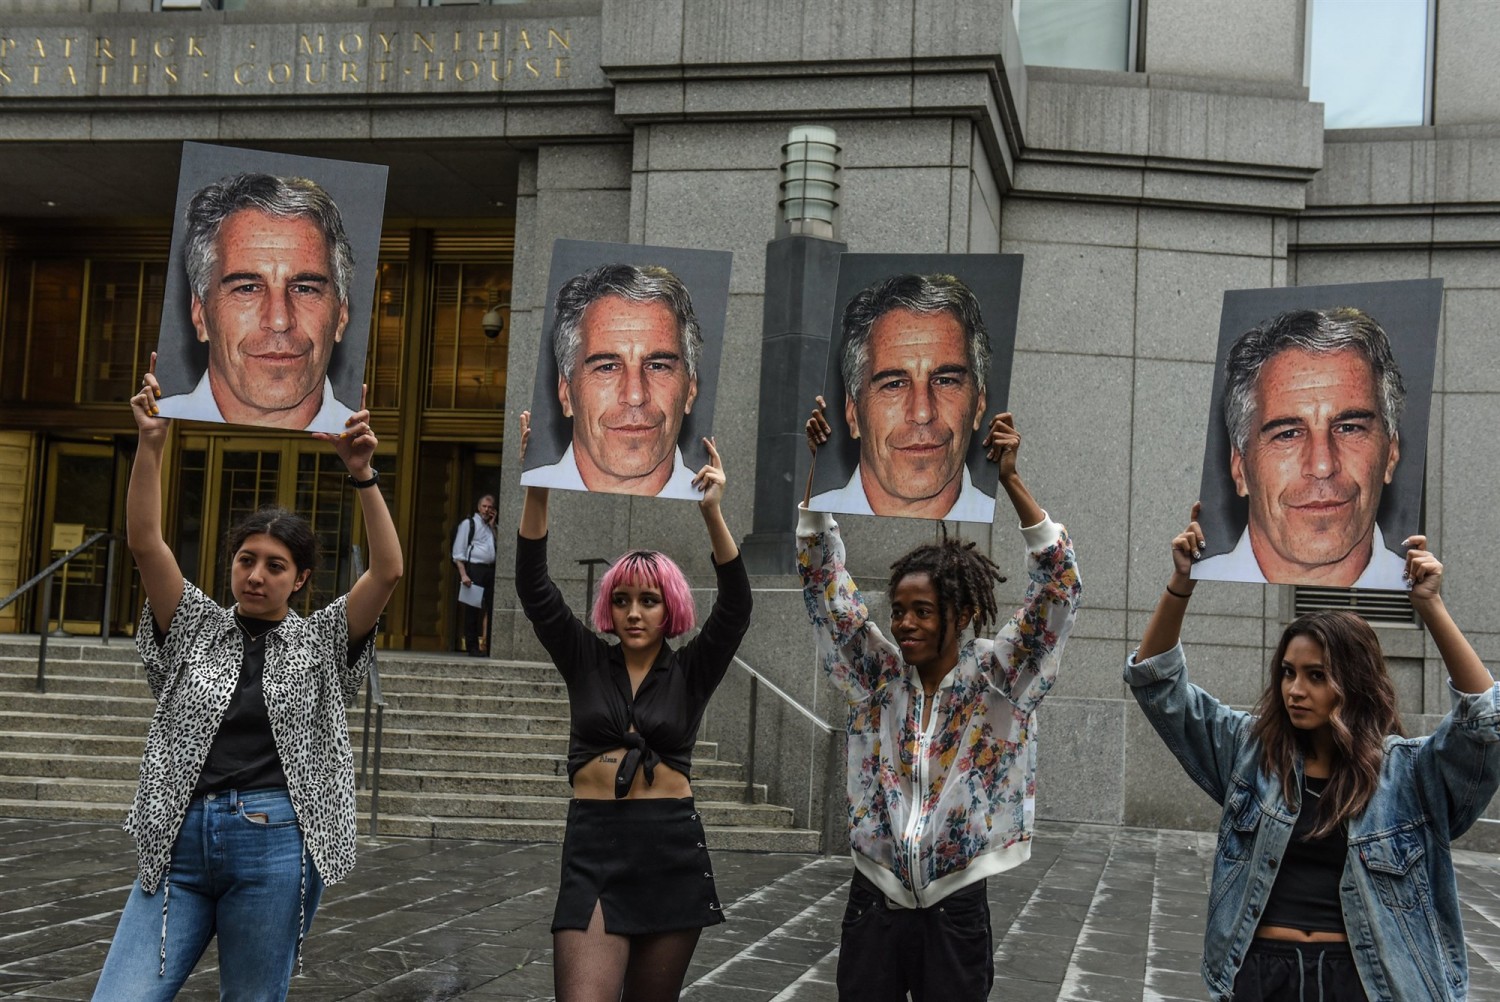 Protesters hold up signs of Jeffrey Epstein in front of the Federal courthouse on July 8, 2019 in New York City.Stephanie Keith / Getty Images file